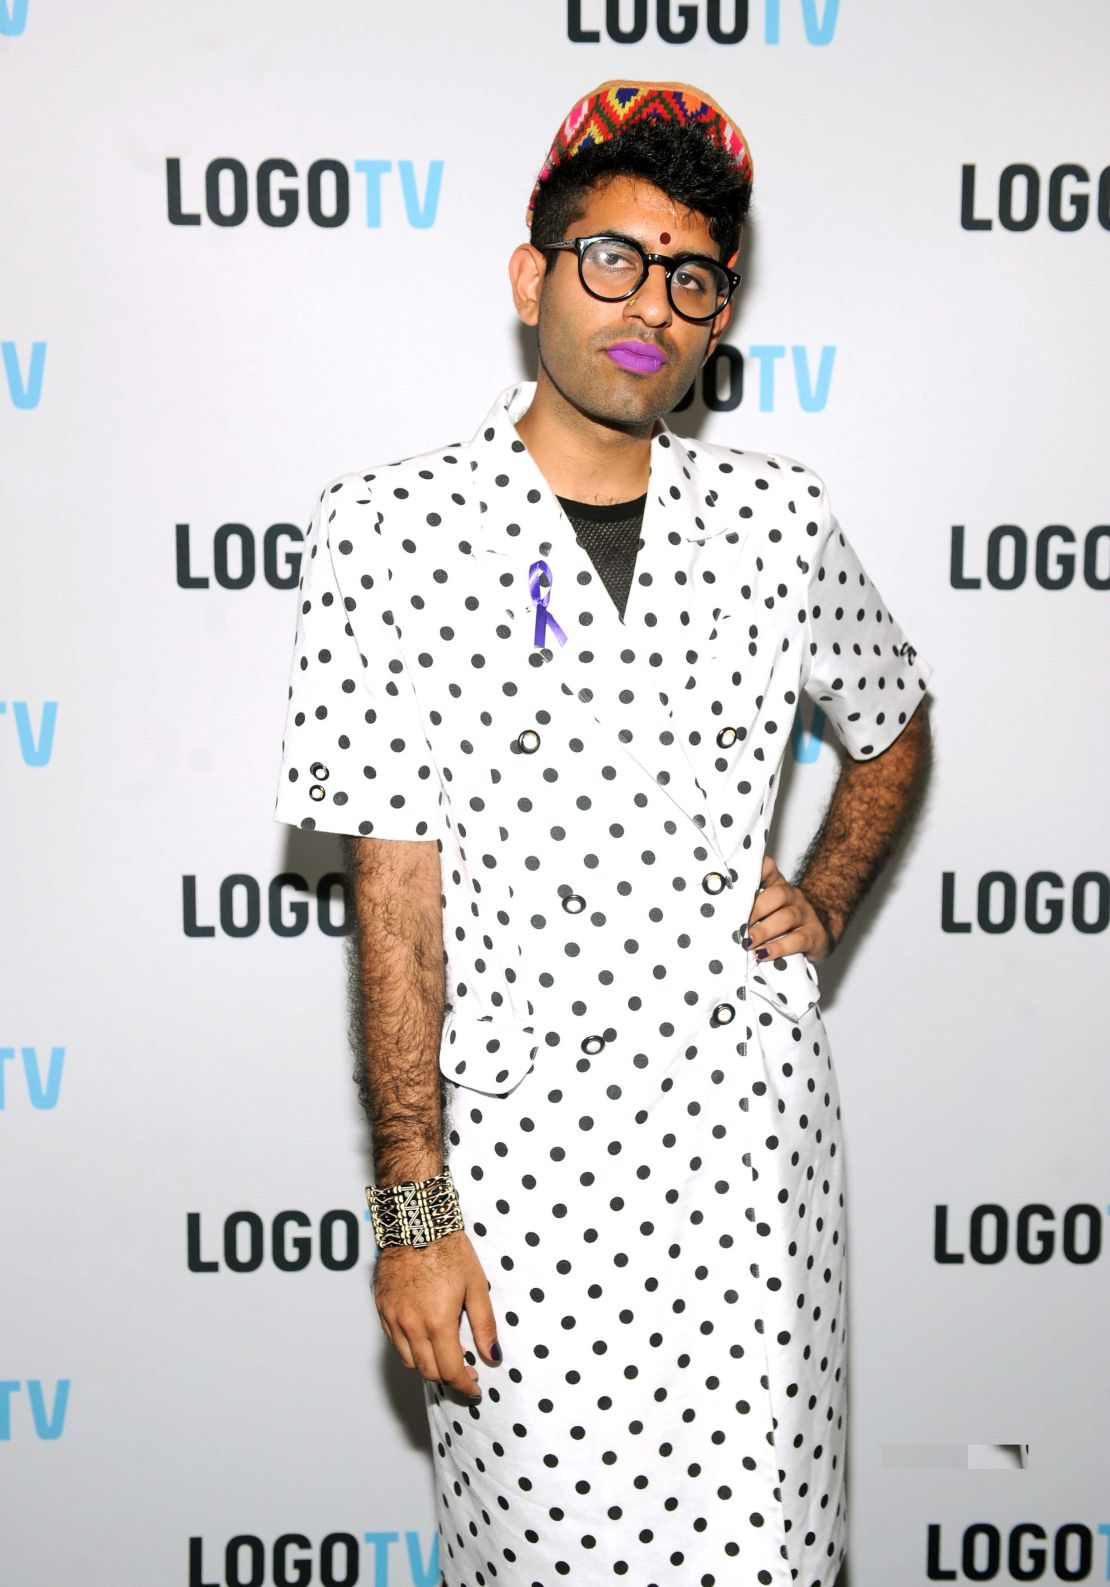  Alok Vaid-Menon attends an event at the Paramount Screening Room  on October 16, 2014 in New York.